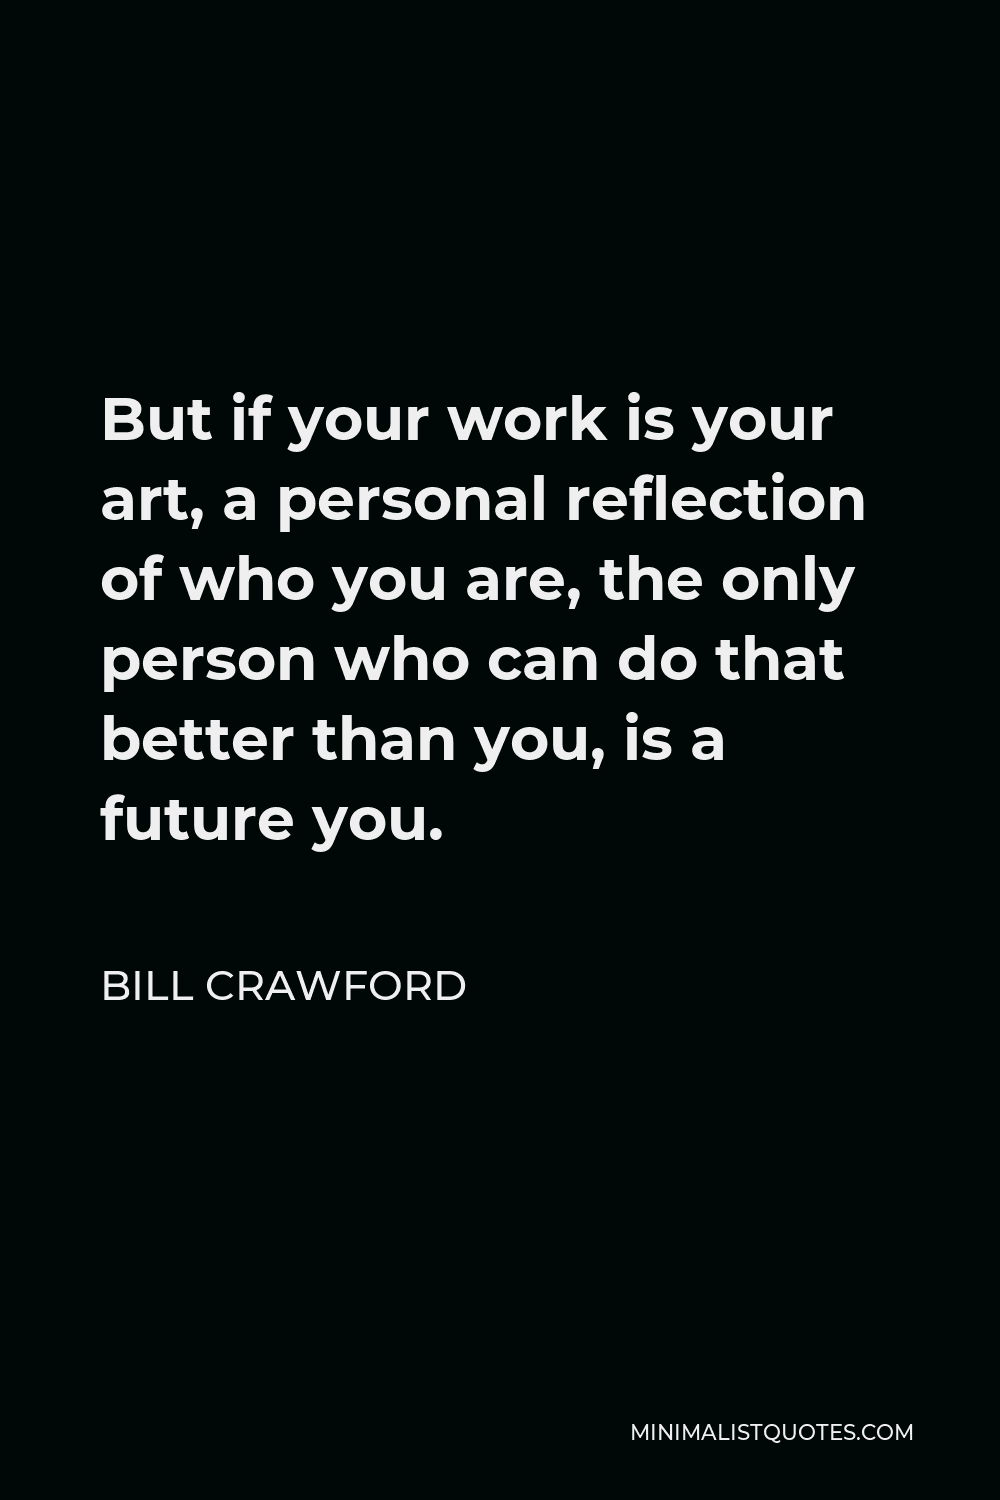 Bill Crawford Quote - But if your work is your art, a personal reflection of who you are, the only person who can do that better than you, is a future you.